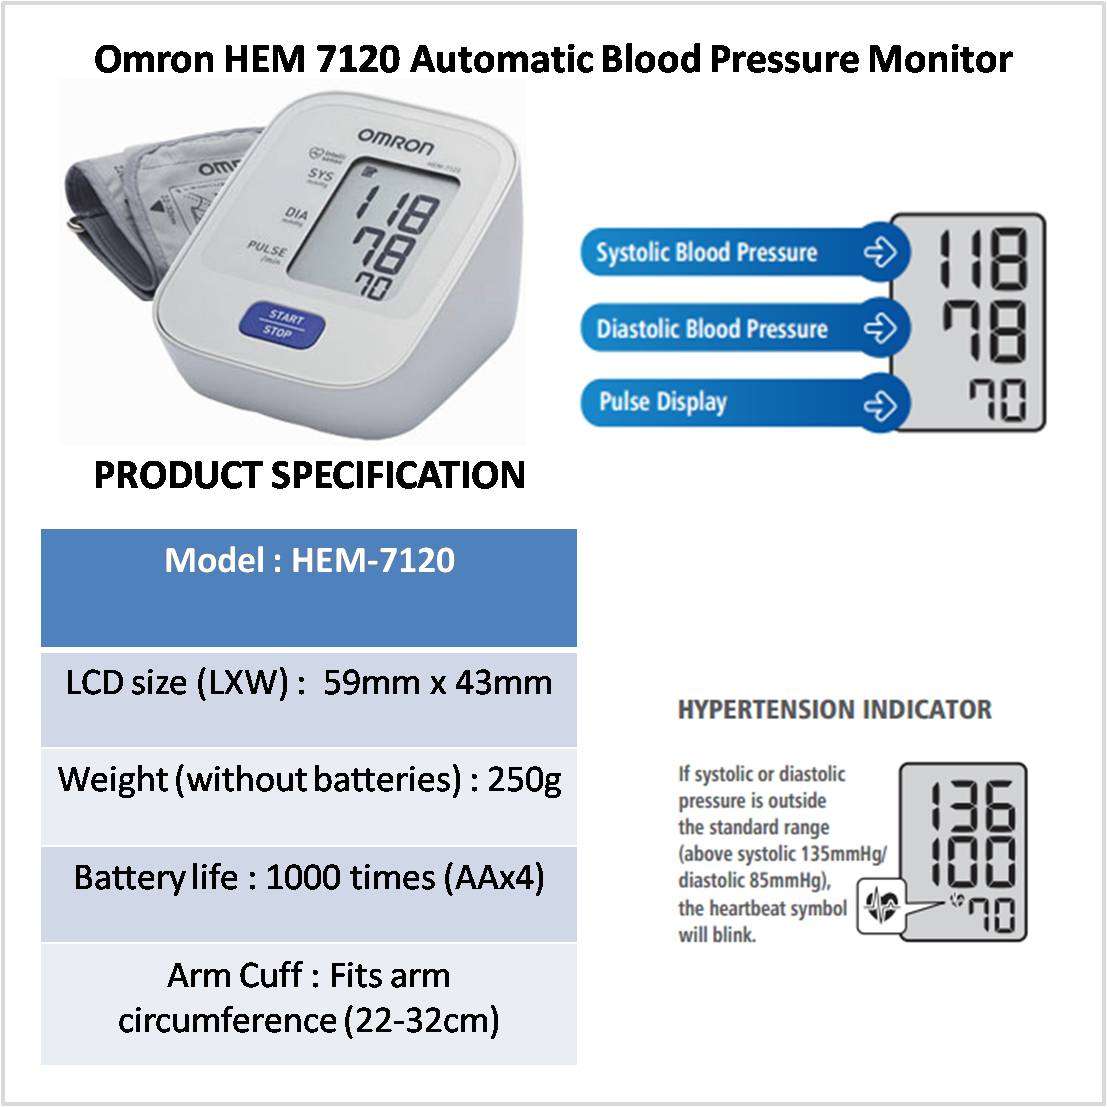 How To Read A Wrist Blood Pressure Monitor